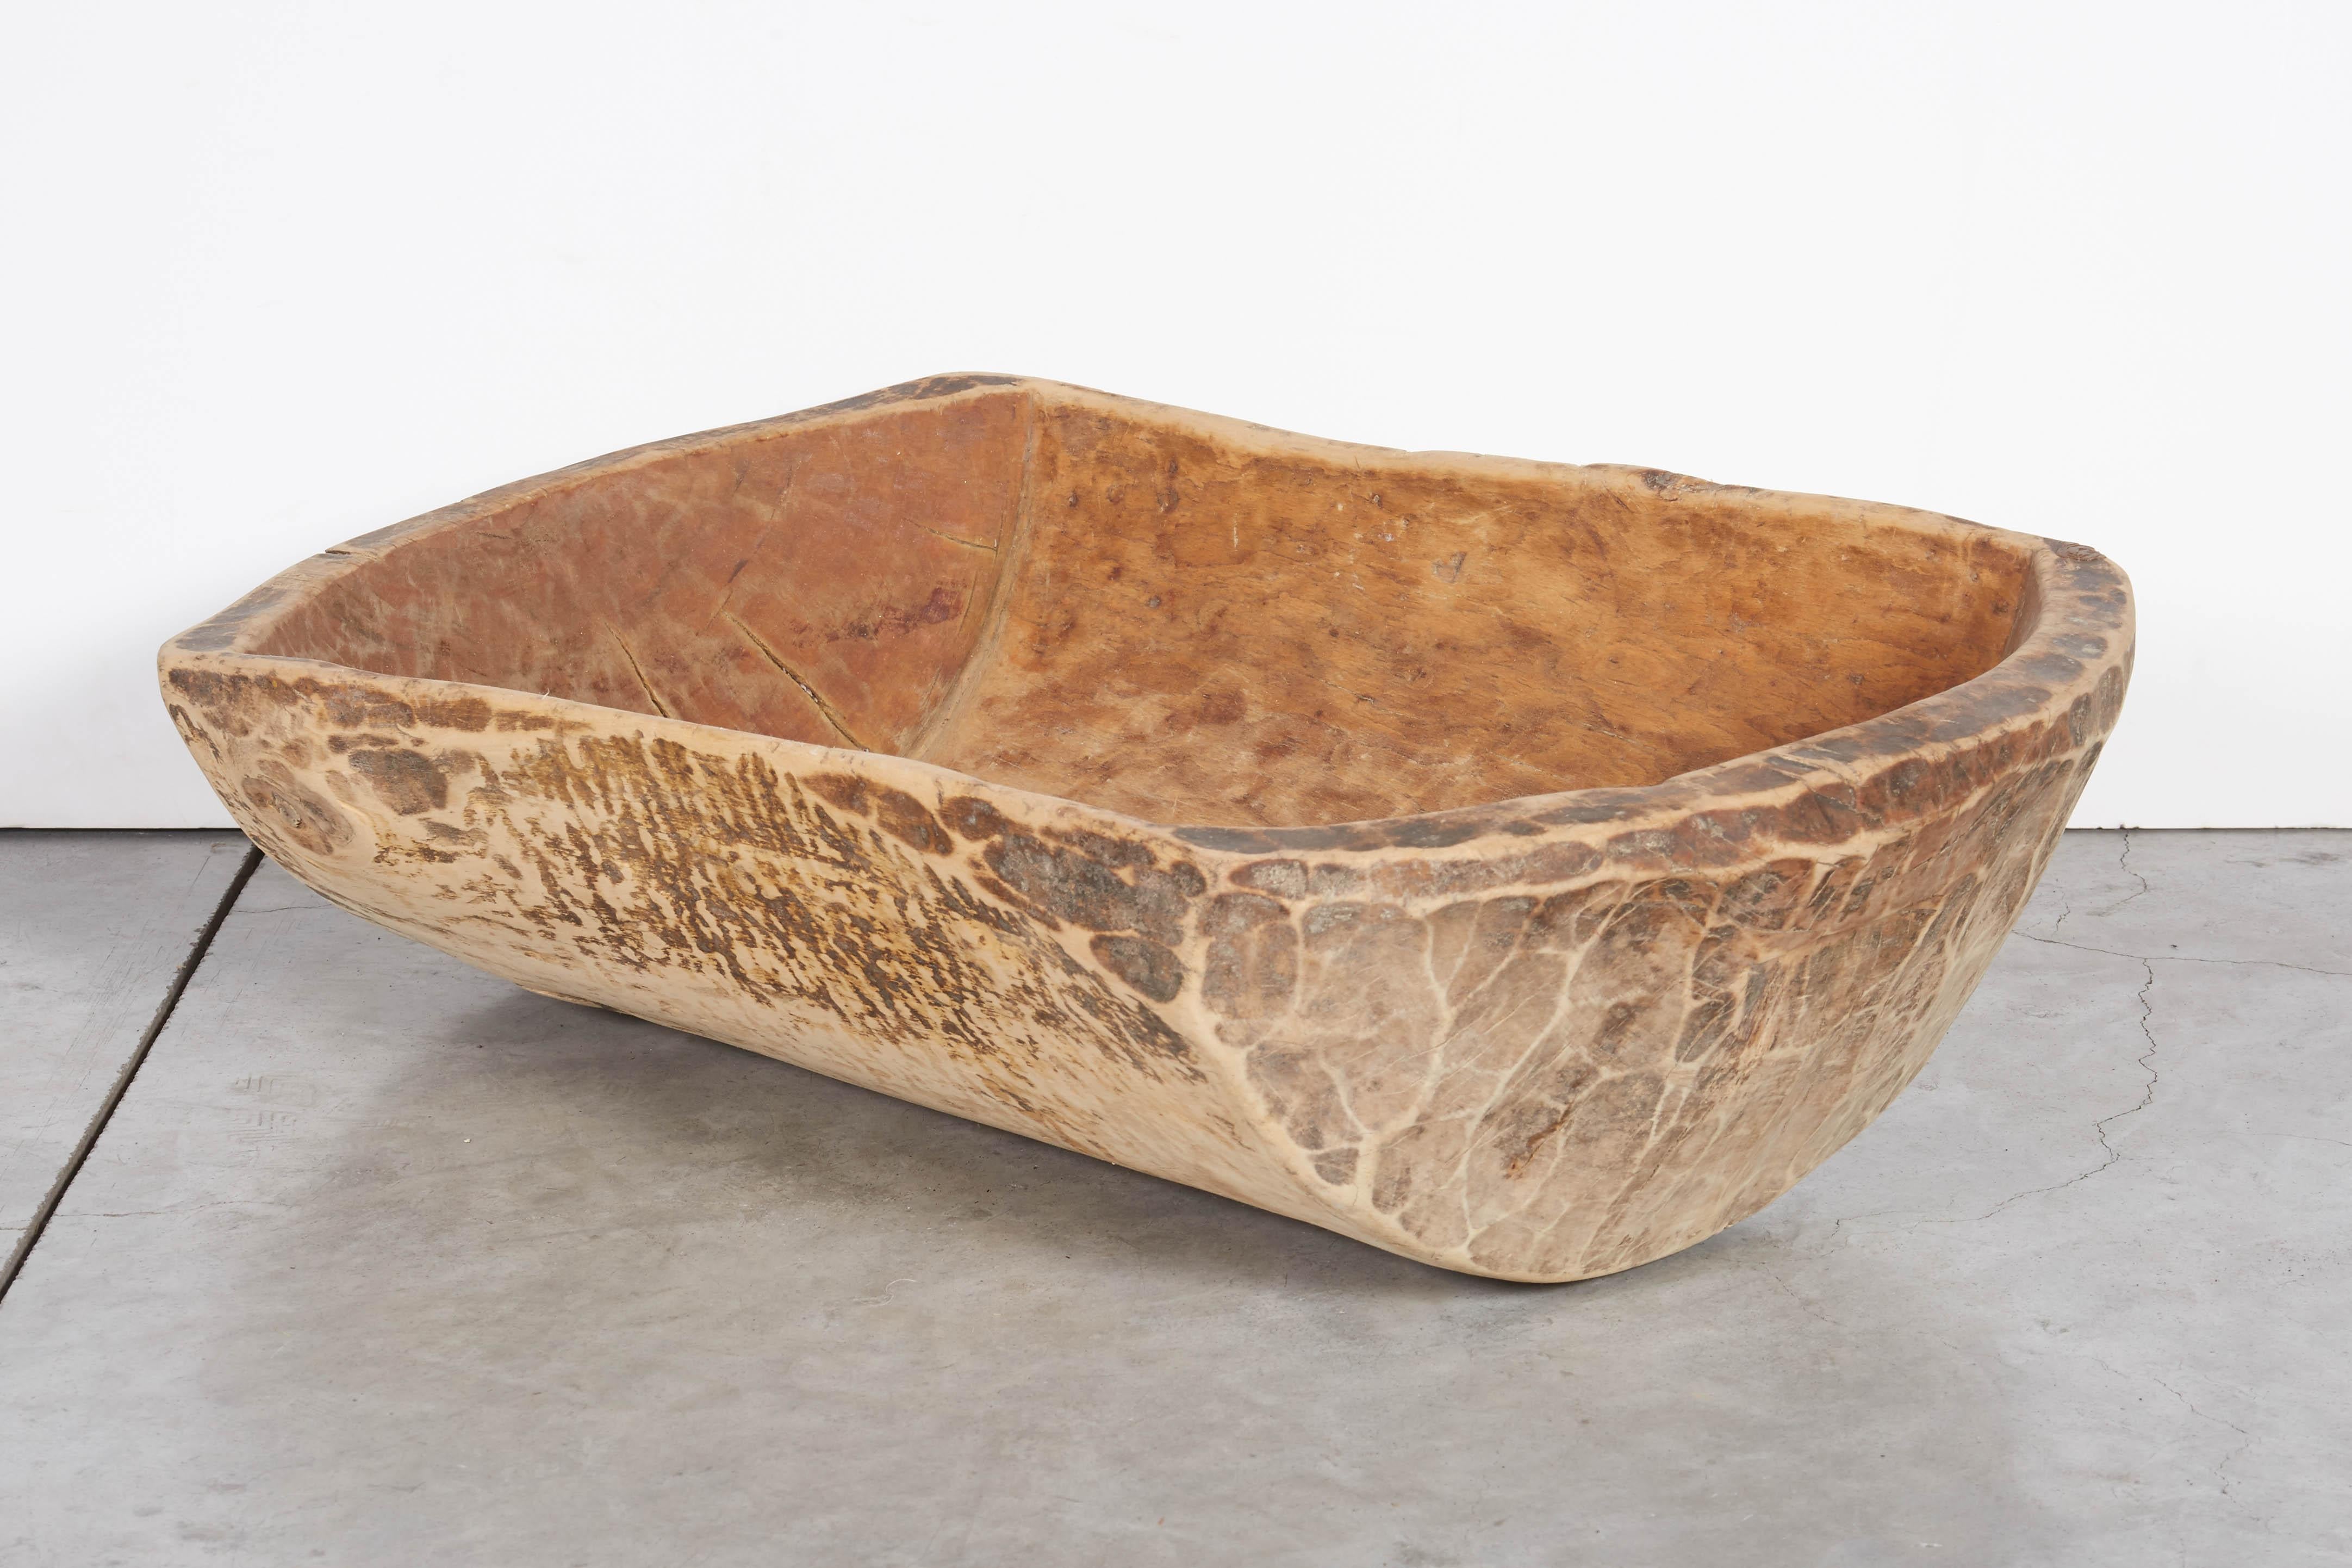  Antique Carved Bowl with Great Patina In Good Condition For Sale In New York, NY